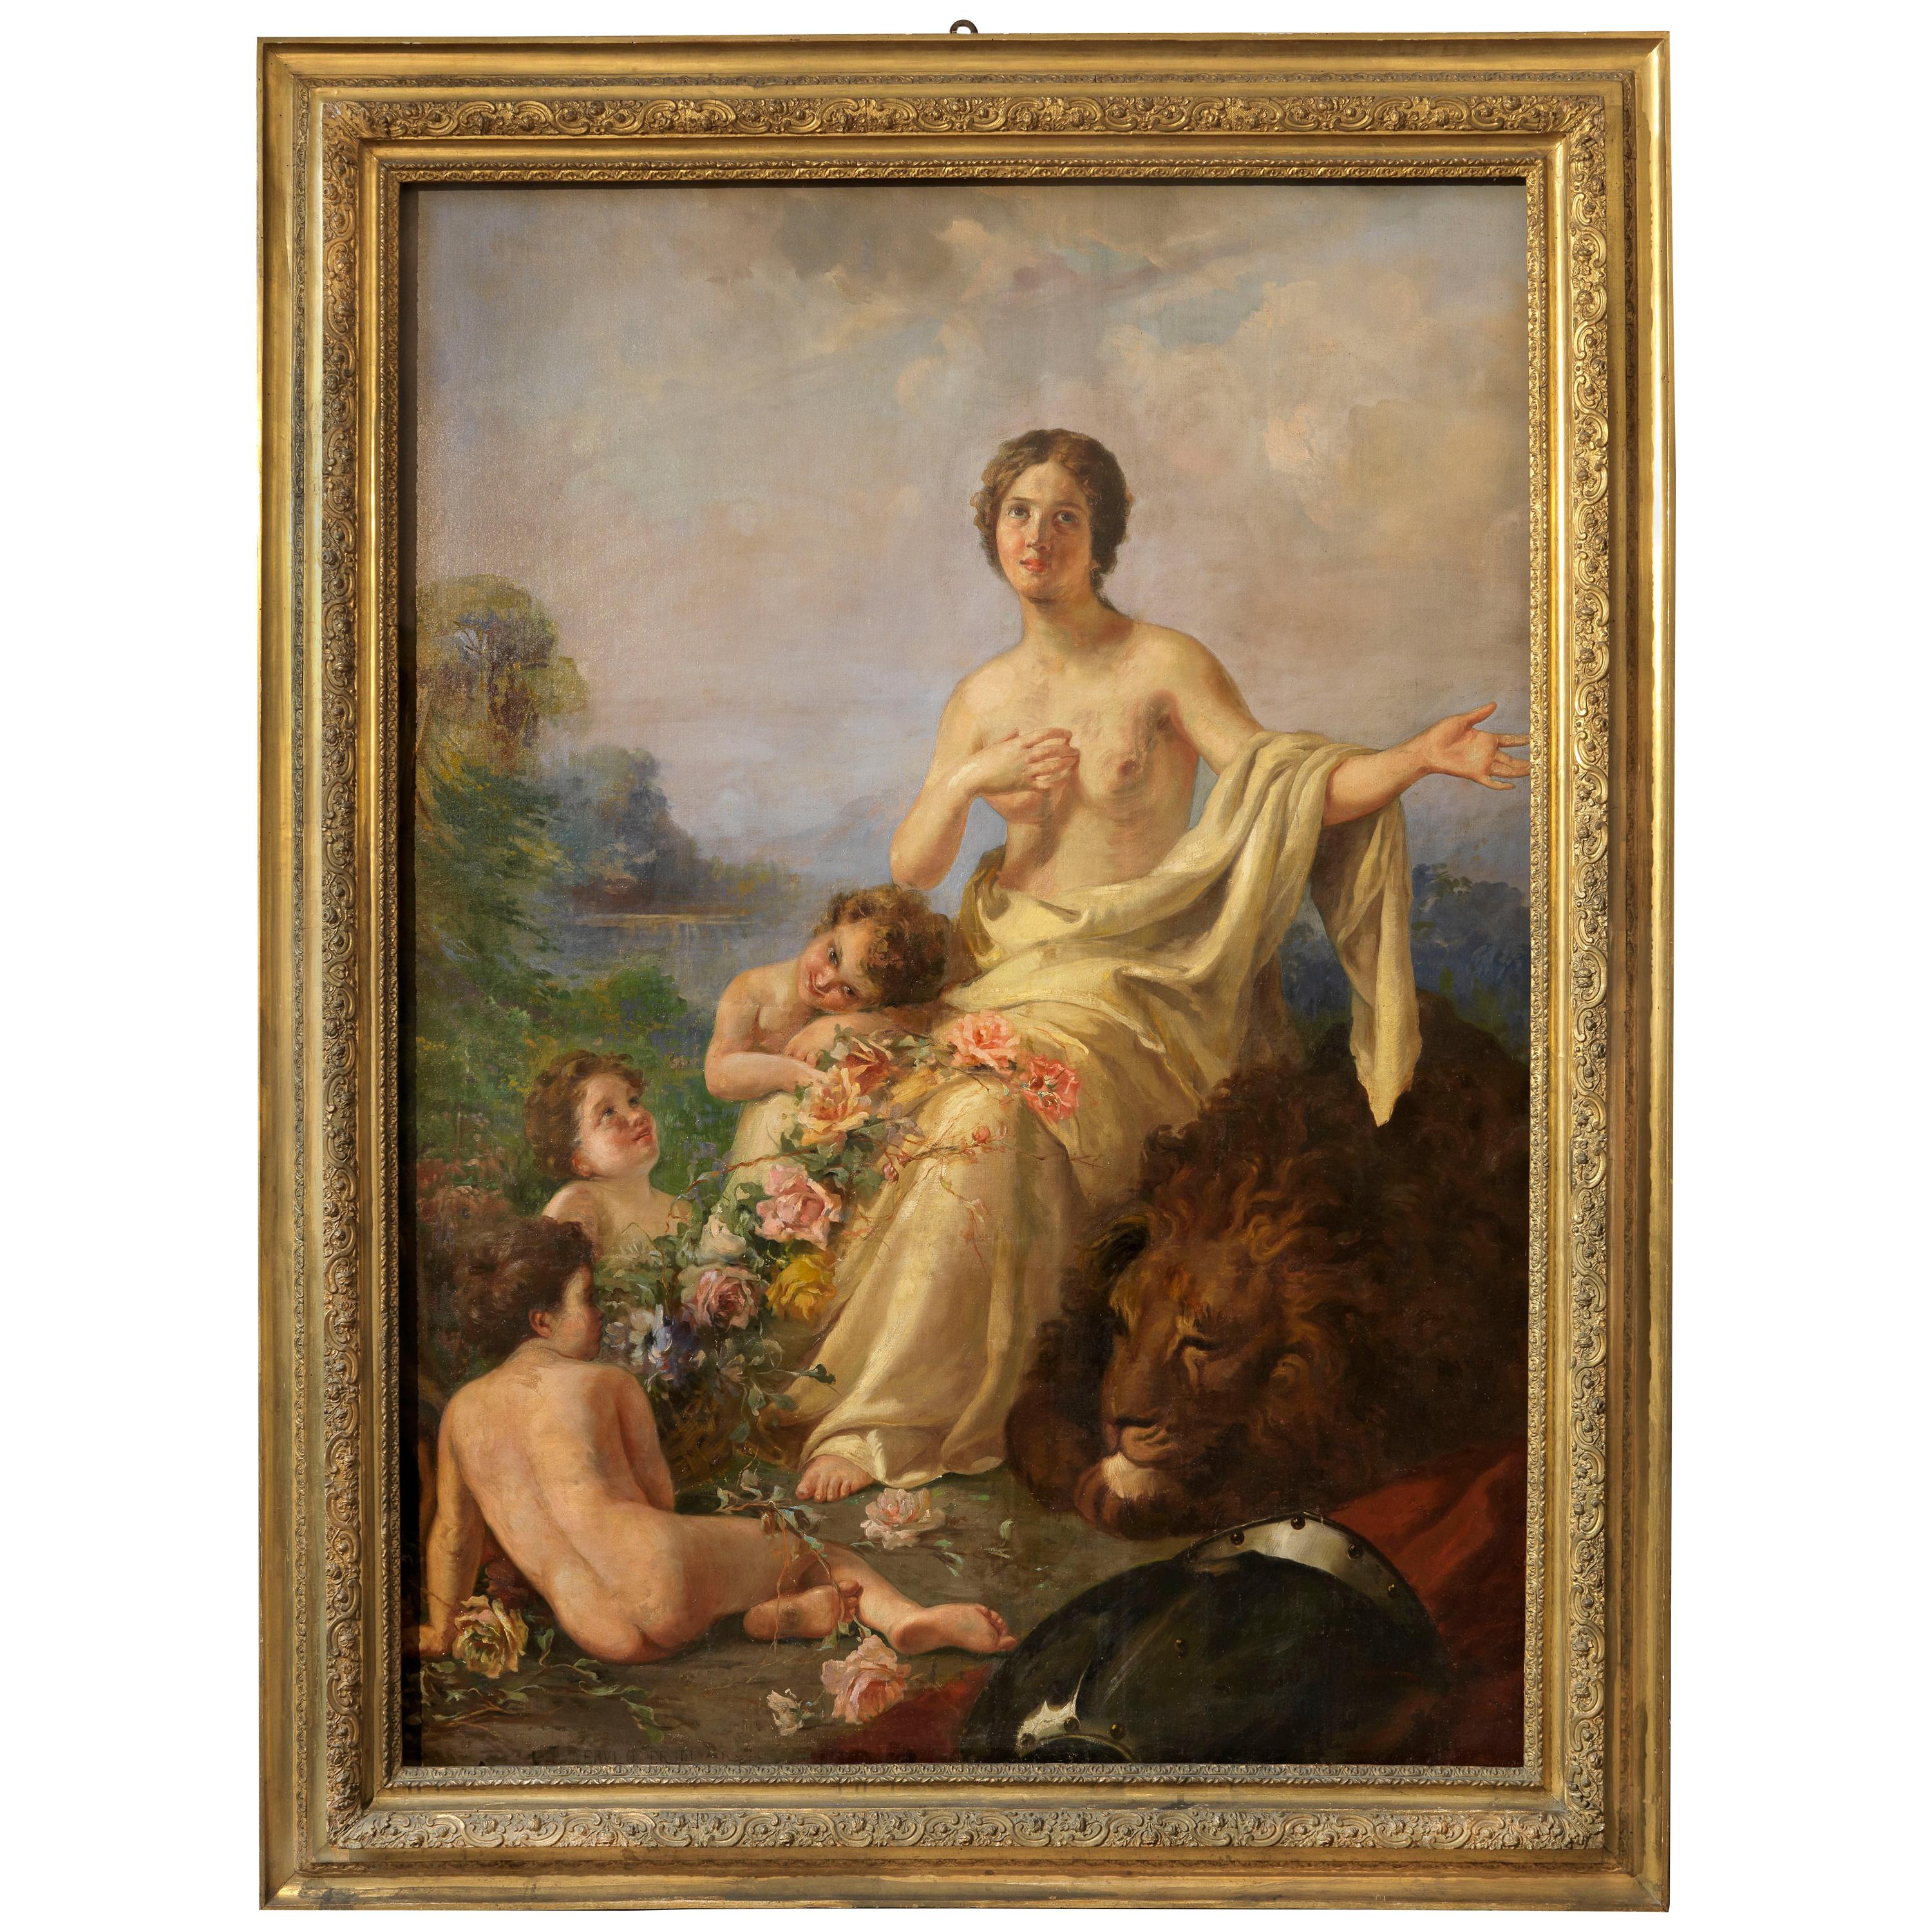 Allegory of Peace Painting Oil on Canvas Signed by Erulo Eroli